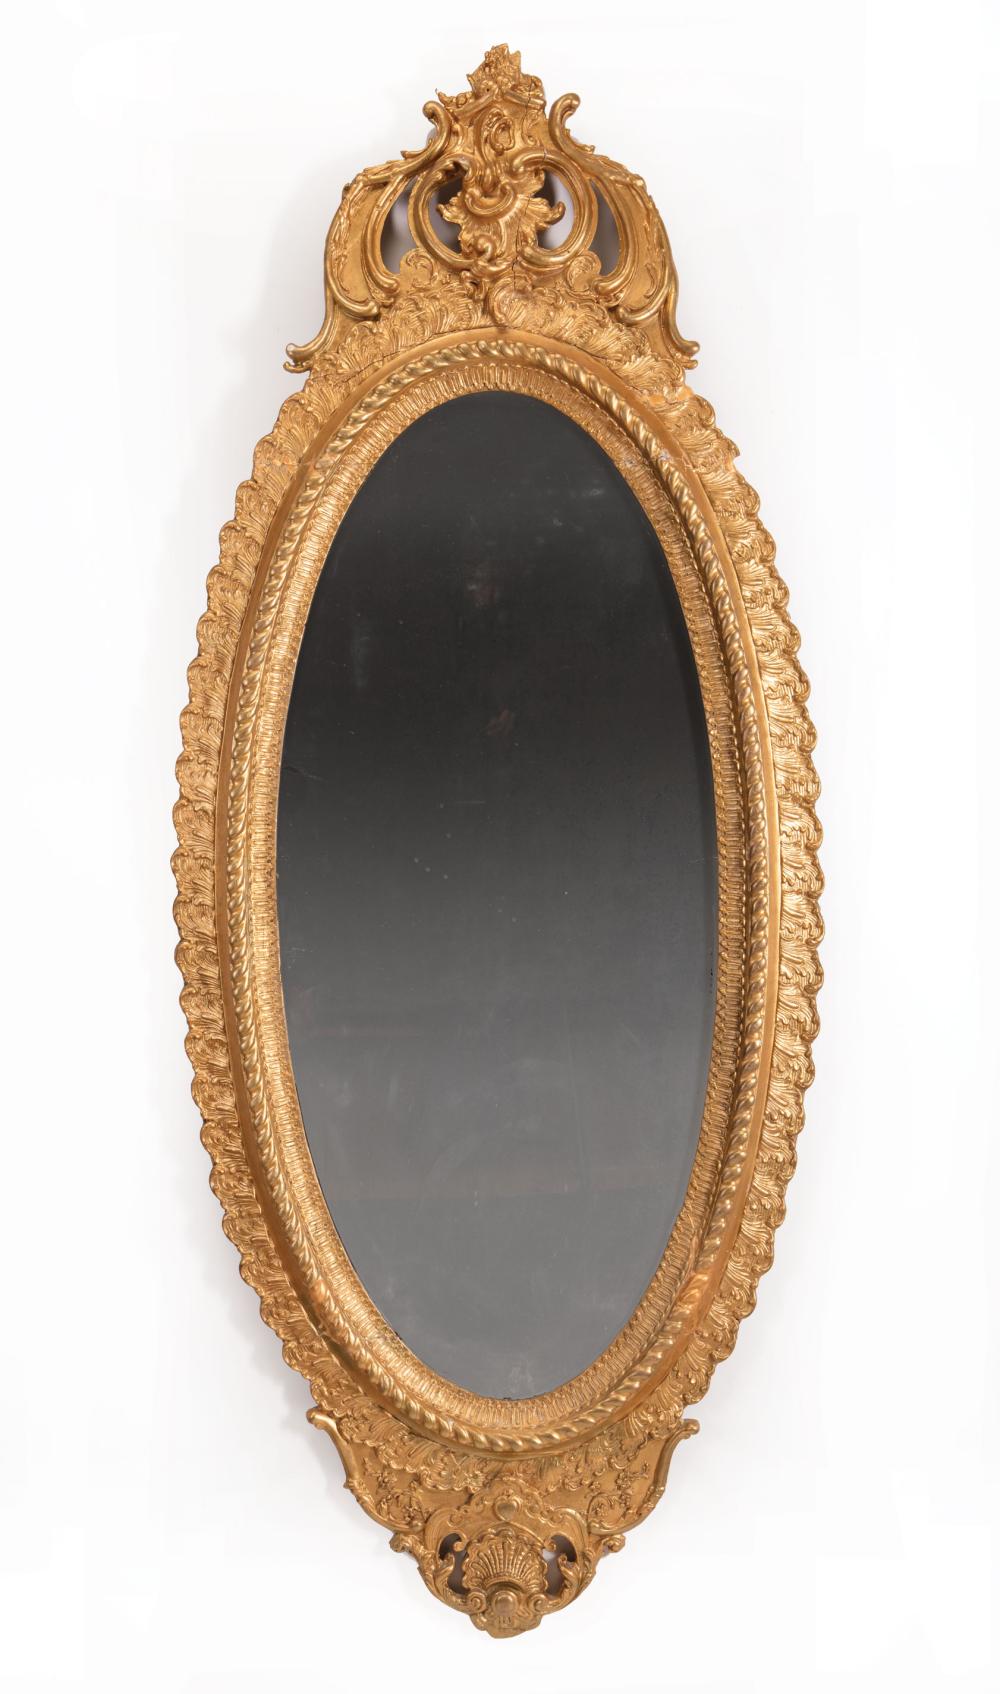 PAIR OF FRENCH GILTWOOD MIRRORSPair